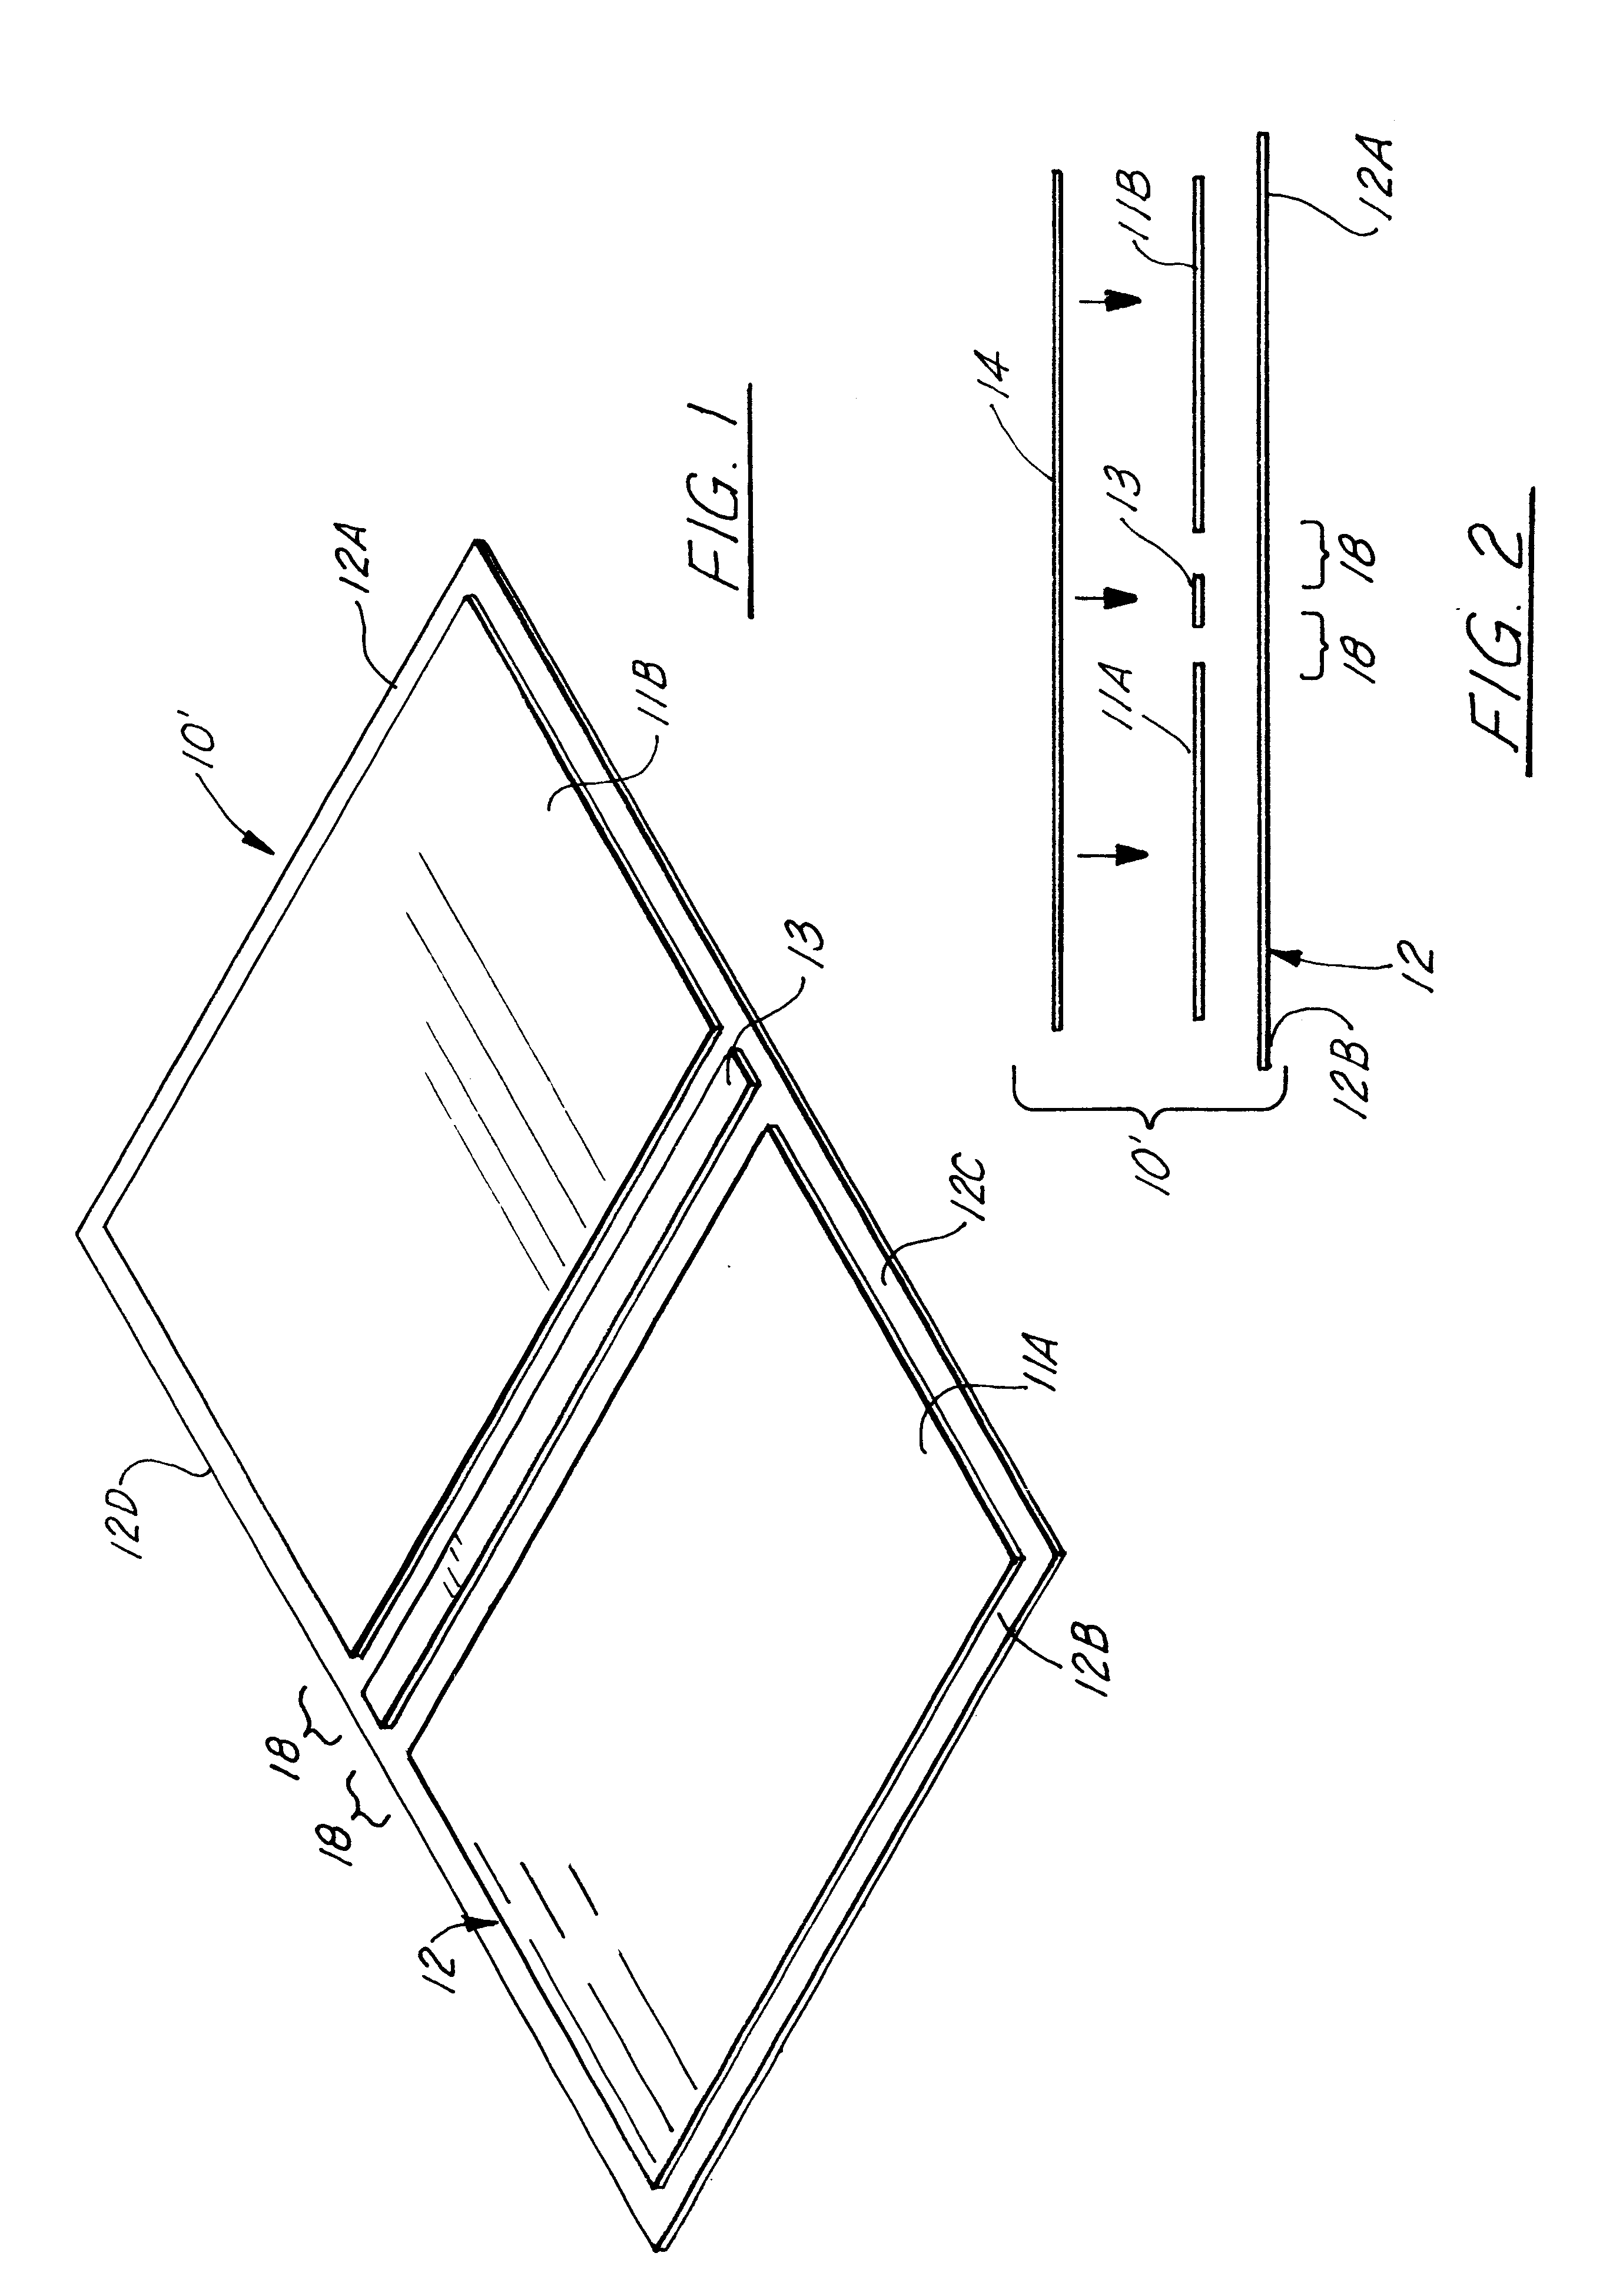 Binder assembly system employing an integral, book-like cover and adhesive channel